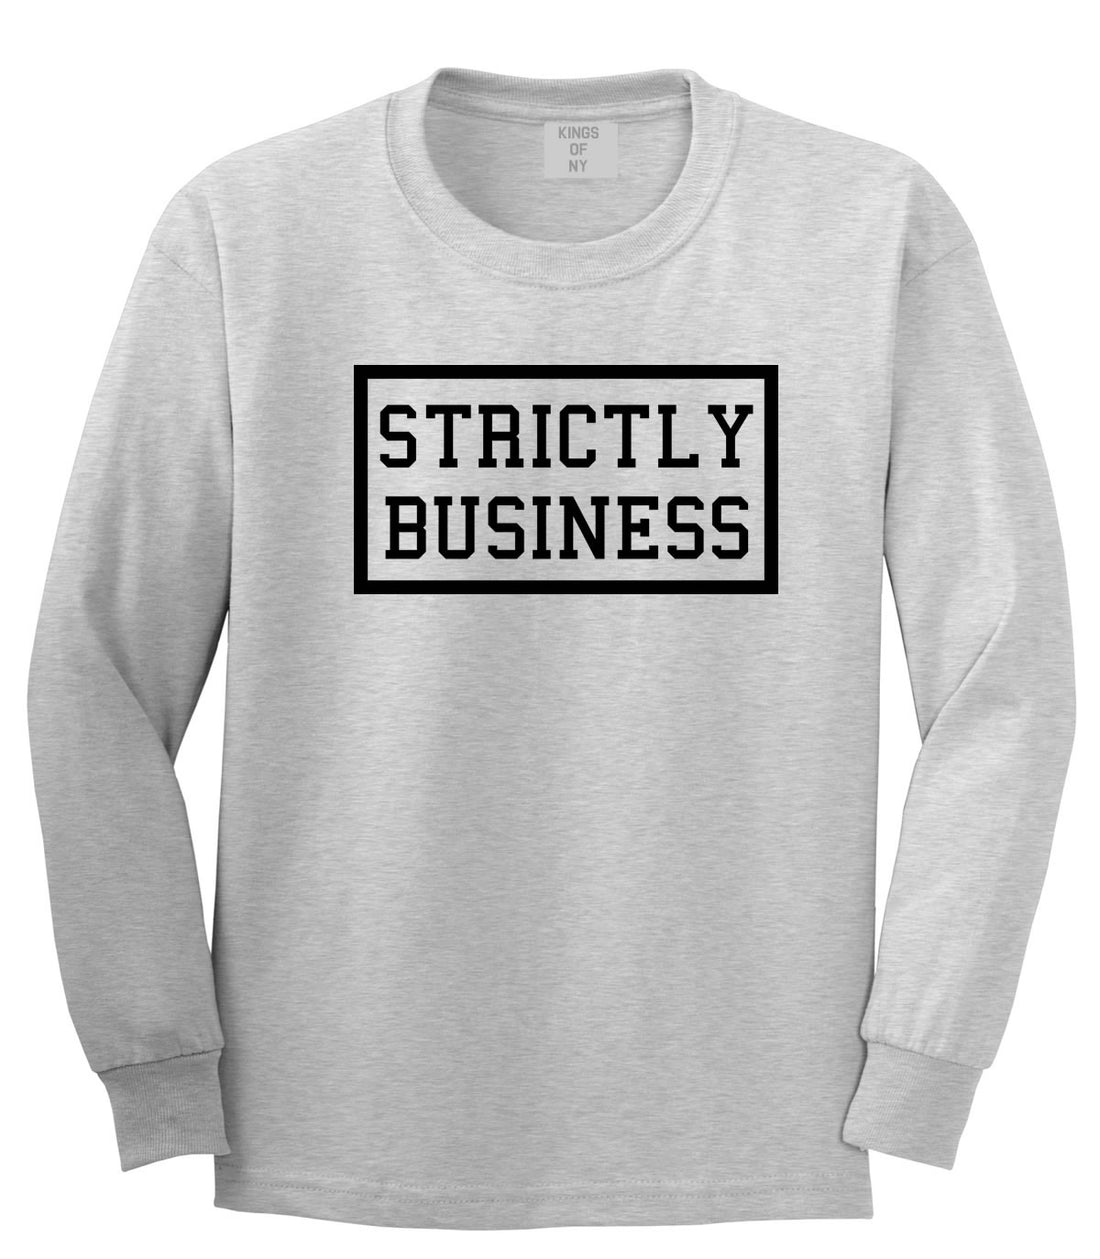 Strictly Business Long Sleeve T-Shirt in Grey by Kings Of NY